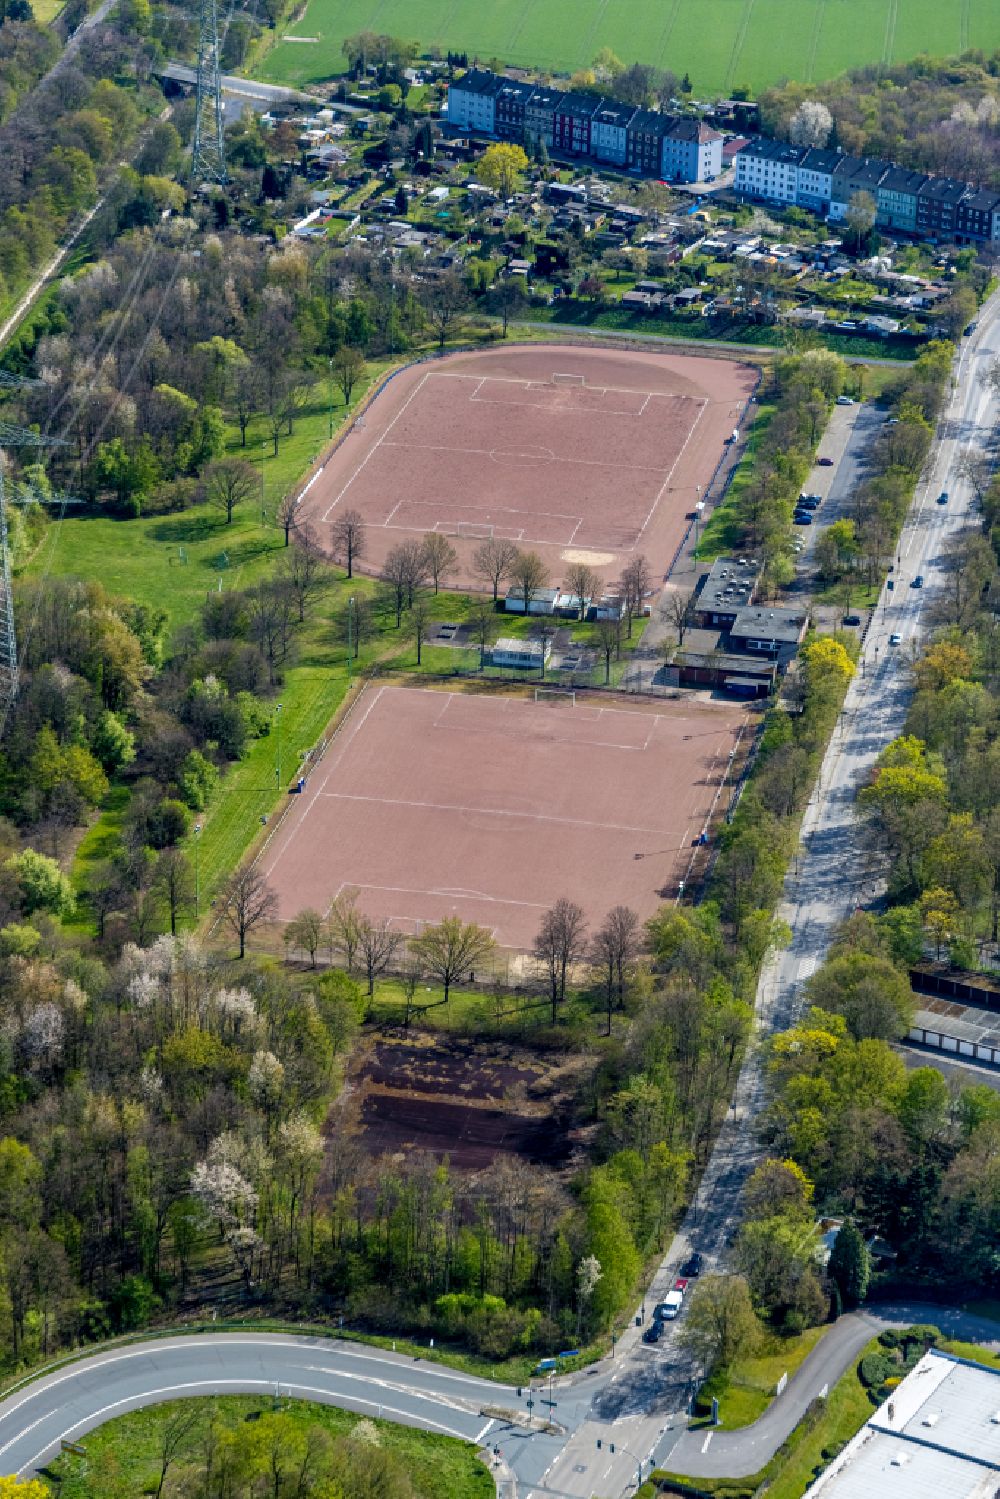 Aerial image Gelsenkirchen - Sports grounds and football pitch of Firtinaspor Gelsenkirchen in the district Bulmke-Huellen in Gelsenkirchen at Ruhrgebiet in the state North Rhine-Westphalia, Germany